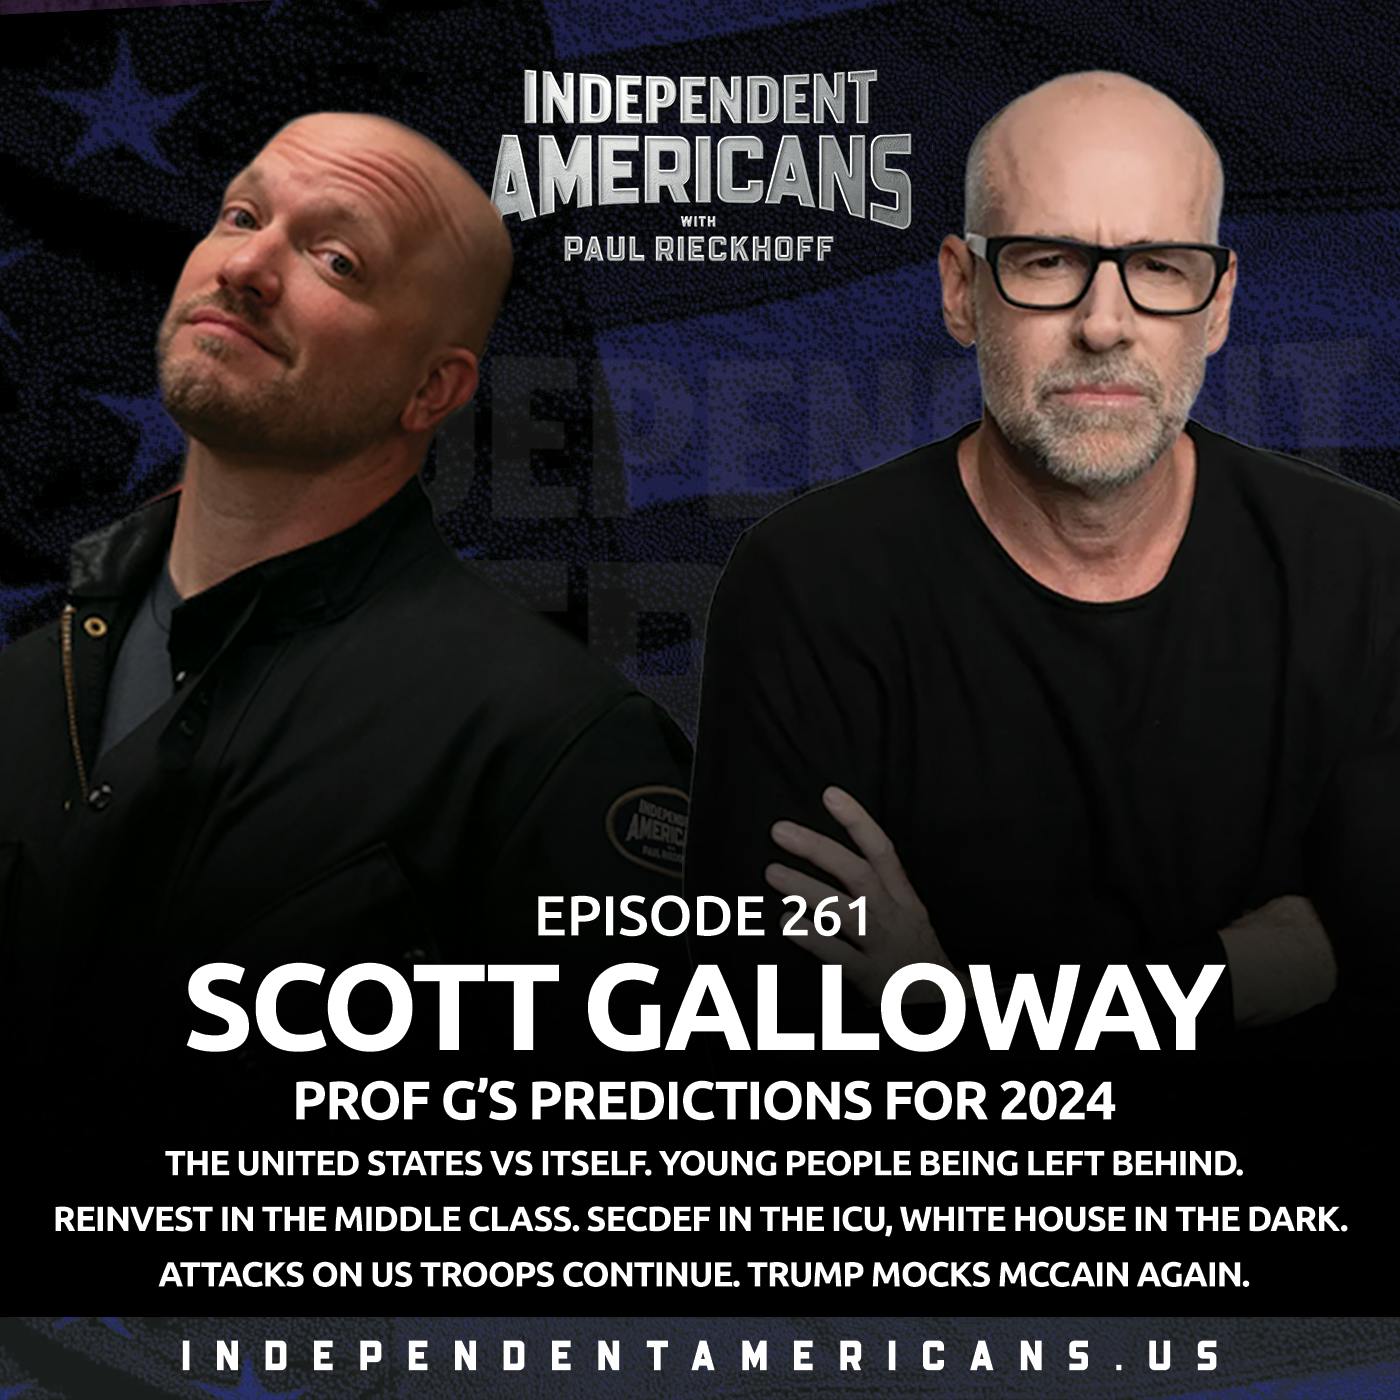 261. Scott Galloway. Prof G’s Predictions for 2024. The United States vs Itself. Young People Being Left Behind. Reinvest in the Middle Class. SECDEF in the ICU, White House in the Dark. Attacks on US Troops Continue. Trump Mocks McCain Again.